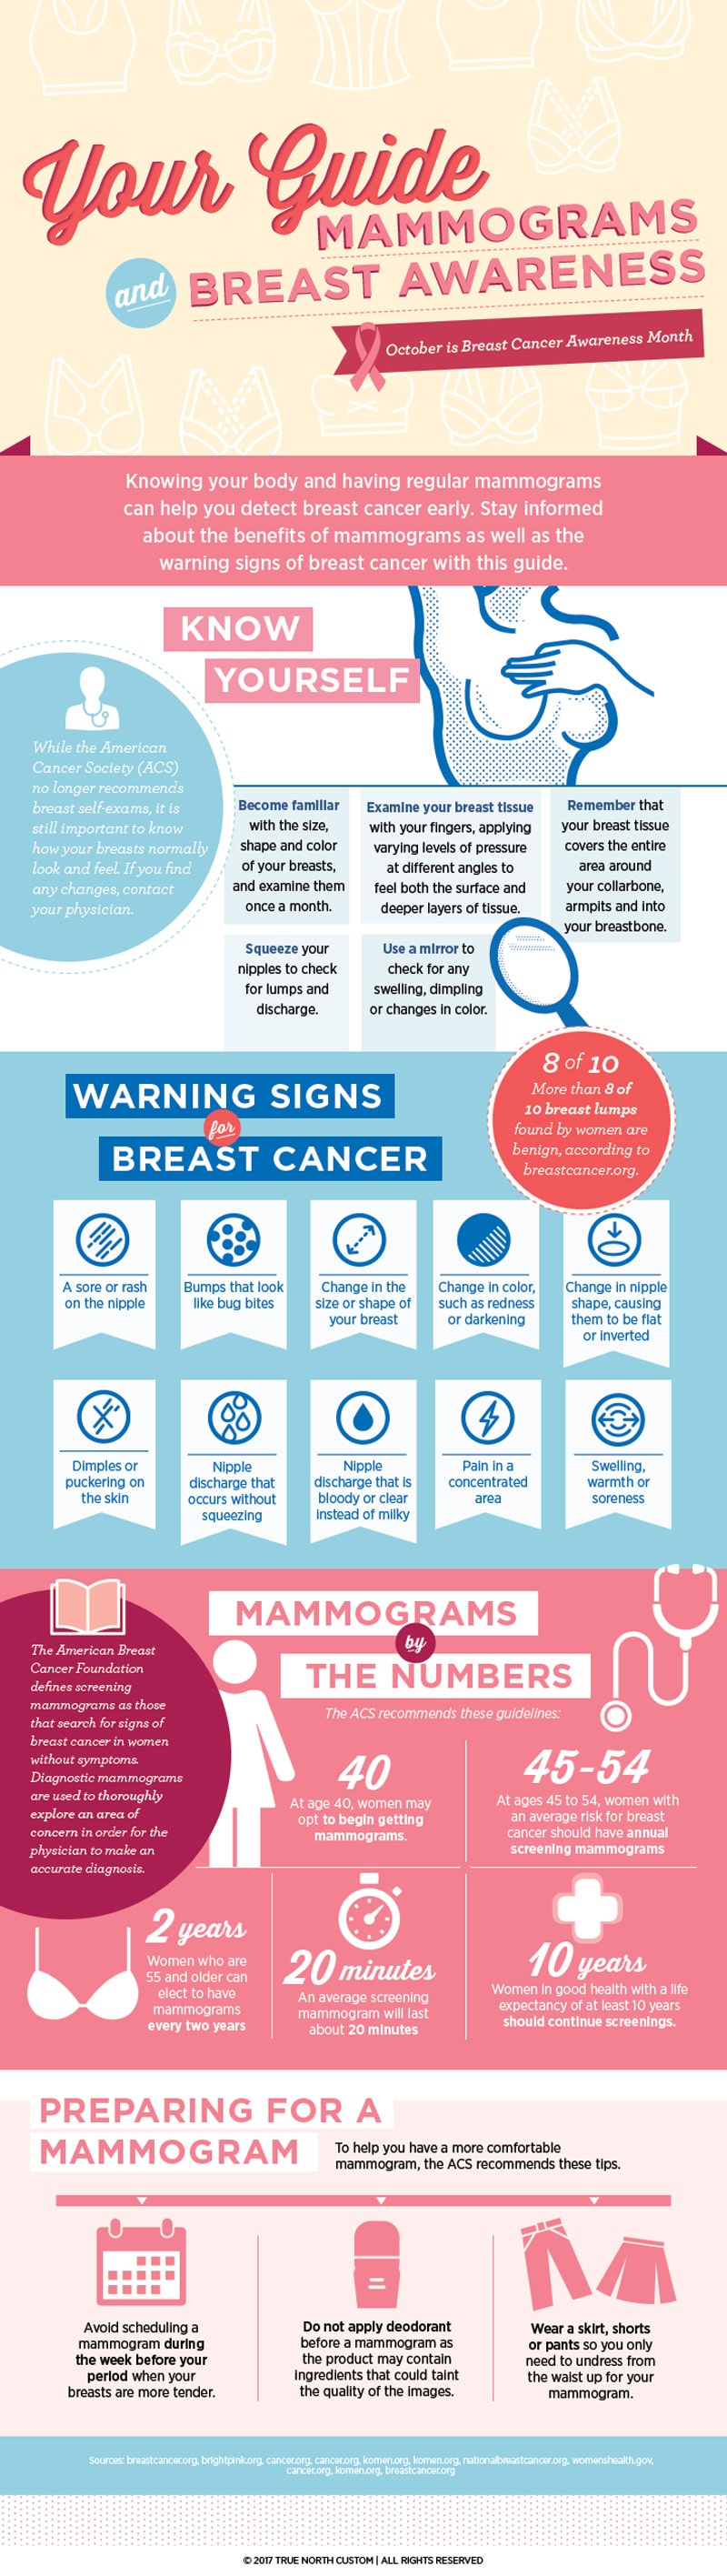 Your Guide for Mammograms and Breast Awareness | Show Low, AZ